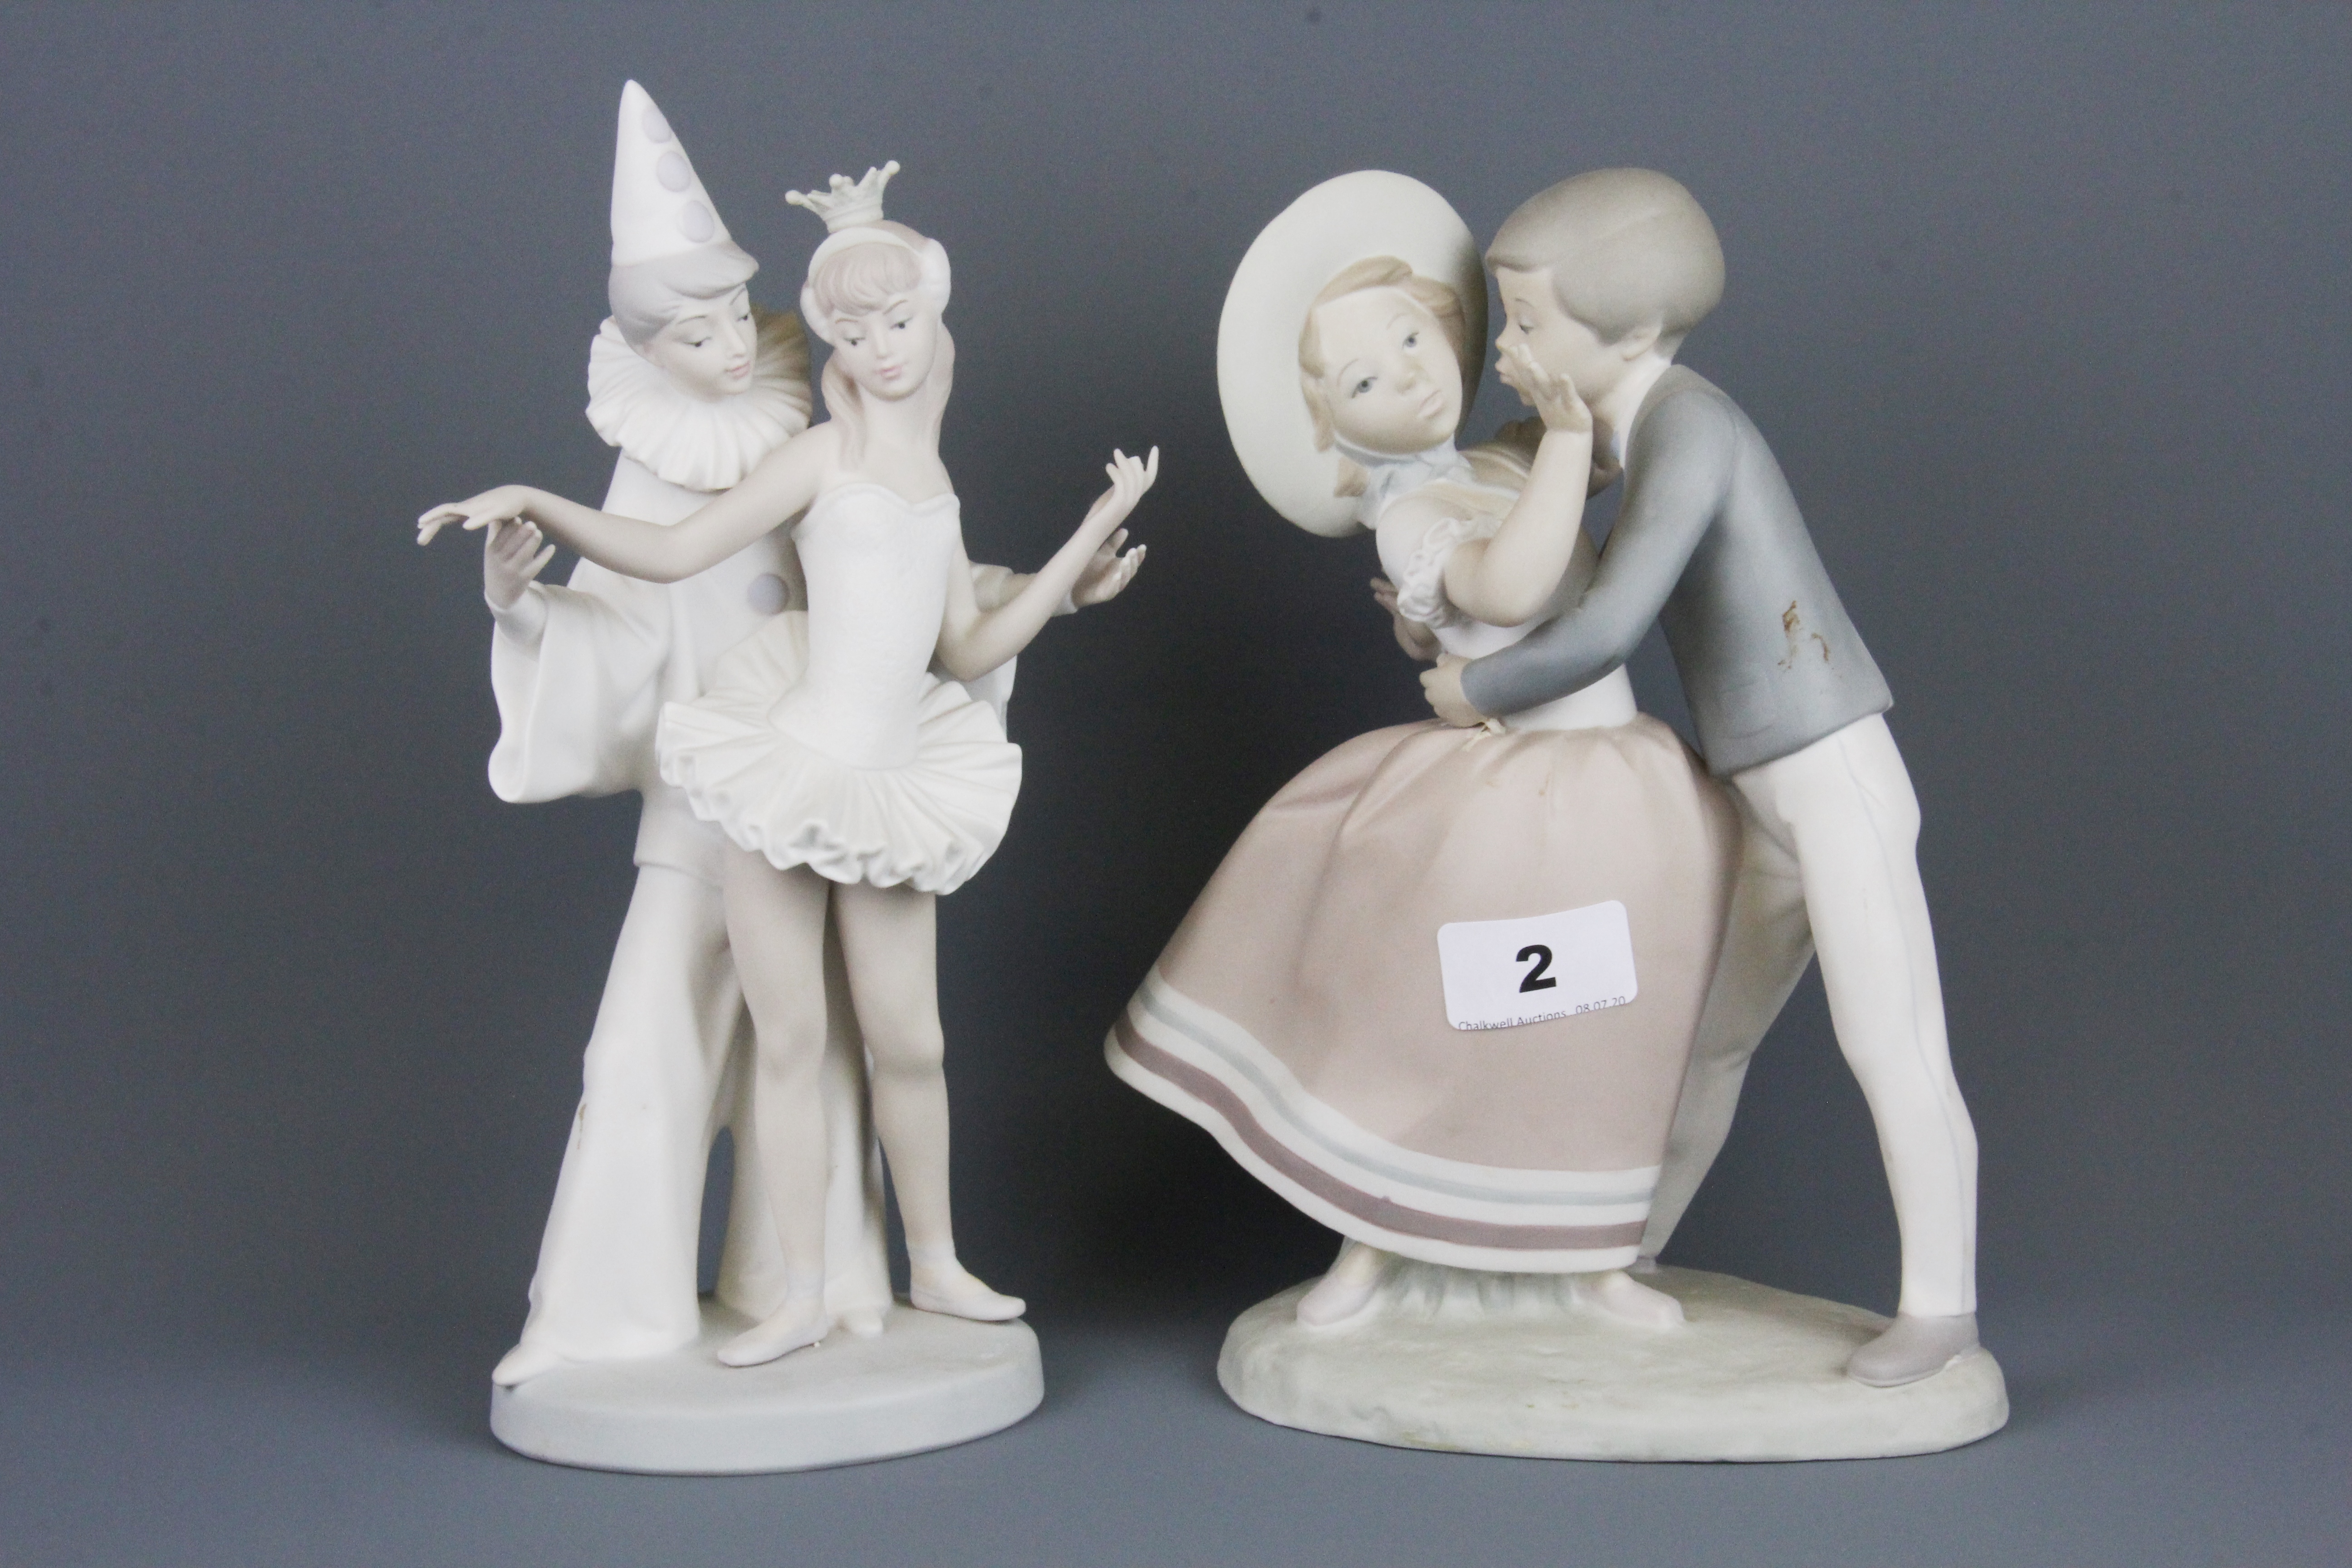 Two Lladro bisque porcelain figures of couples, H. 27, H. 25. Condition: both figures have one